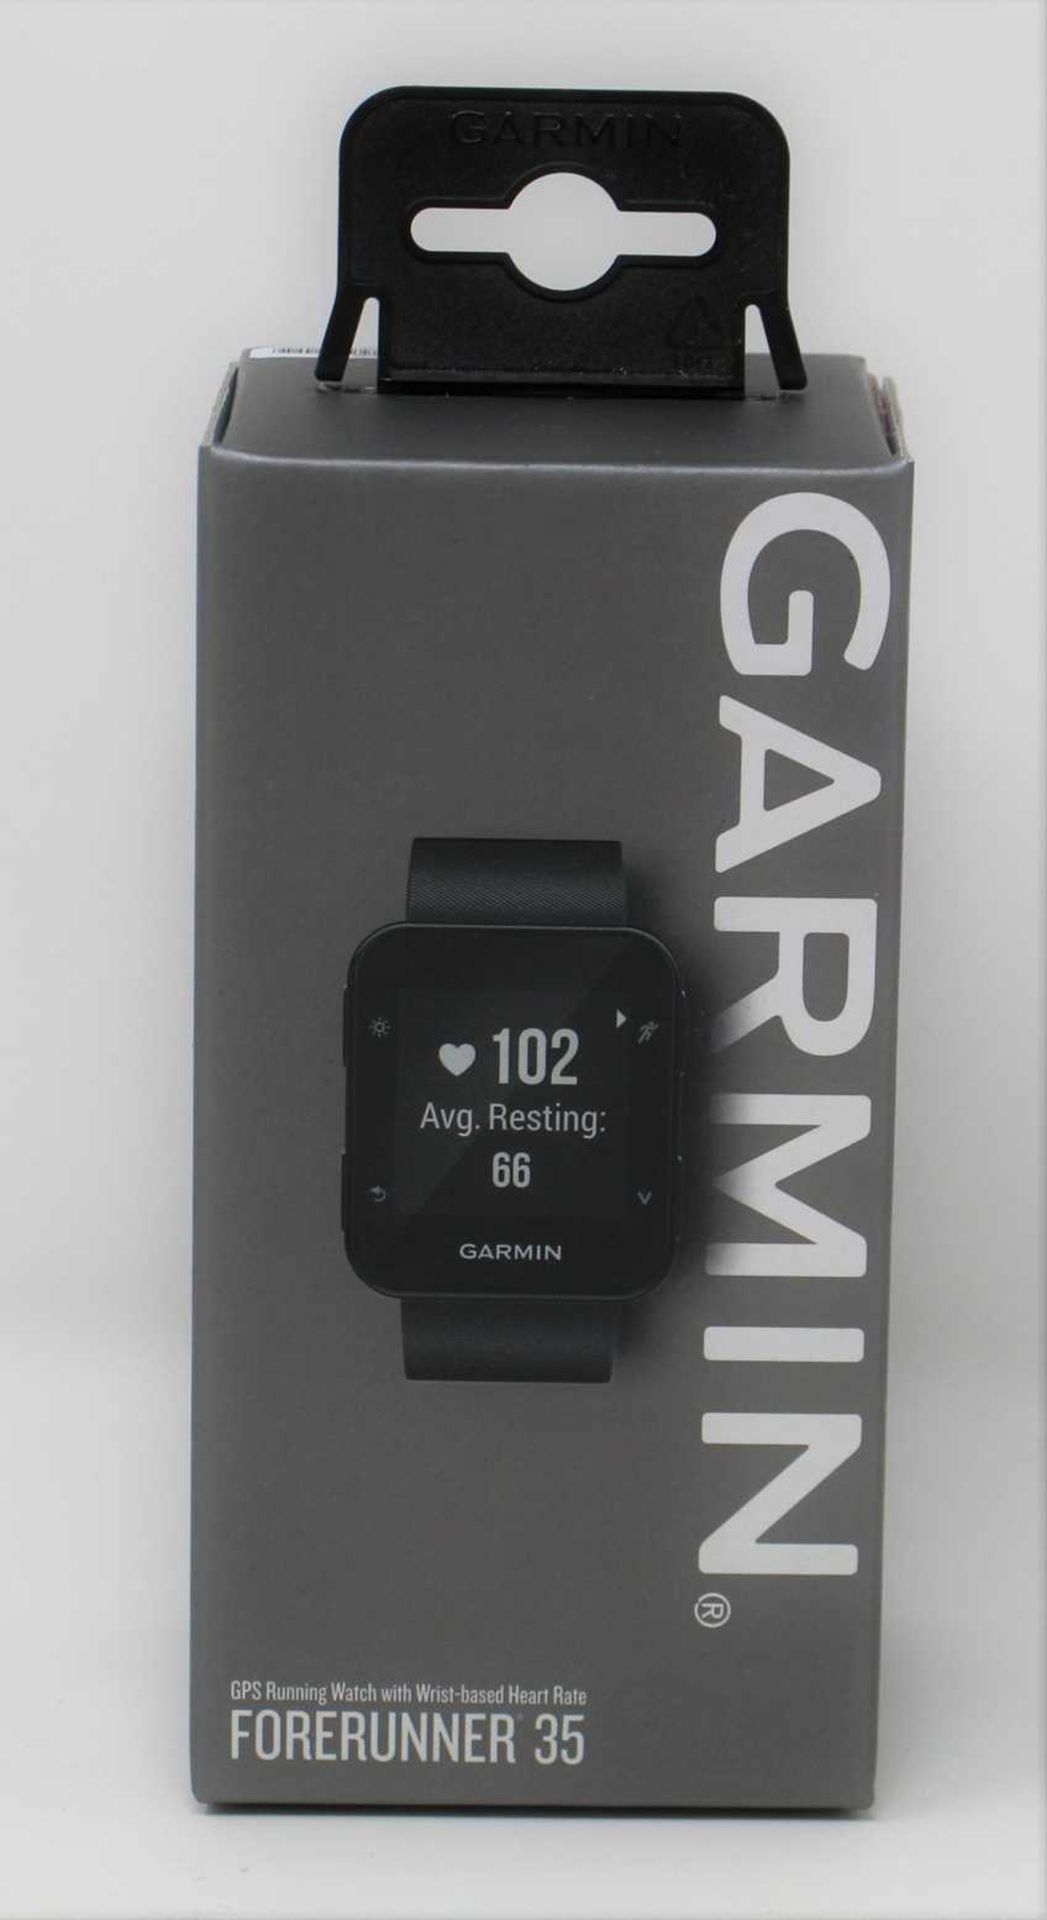 A boxed as new Garmin Forerunner 35 GPS Running Watch with Wrist-Based Heart Rate Monitor in